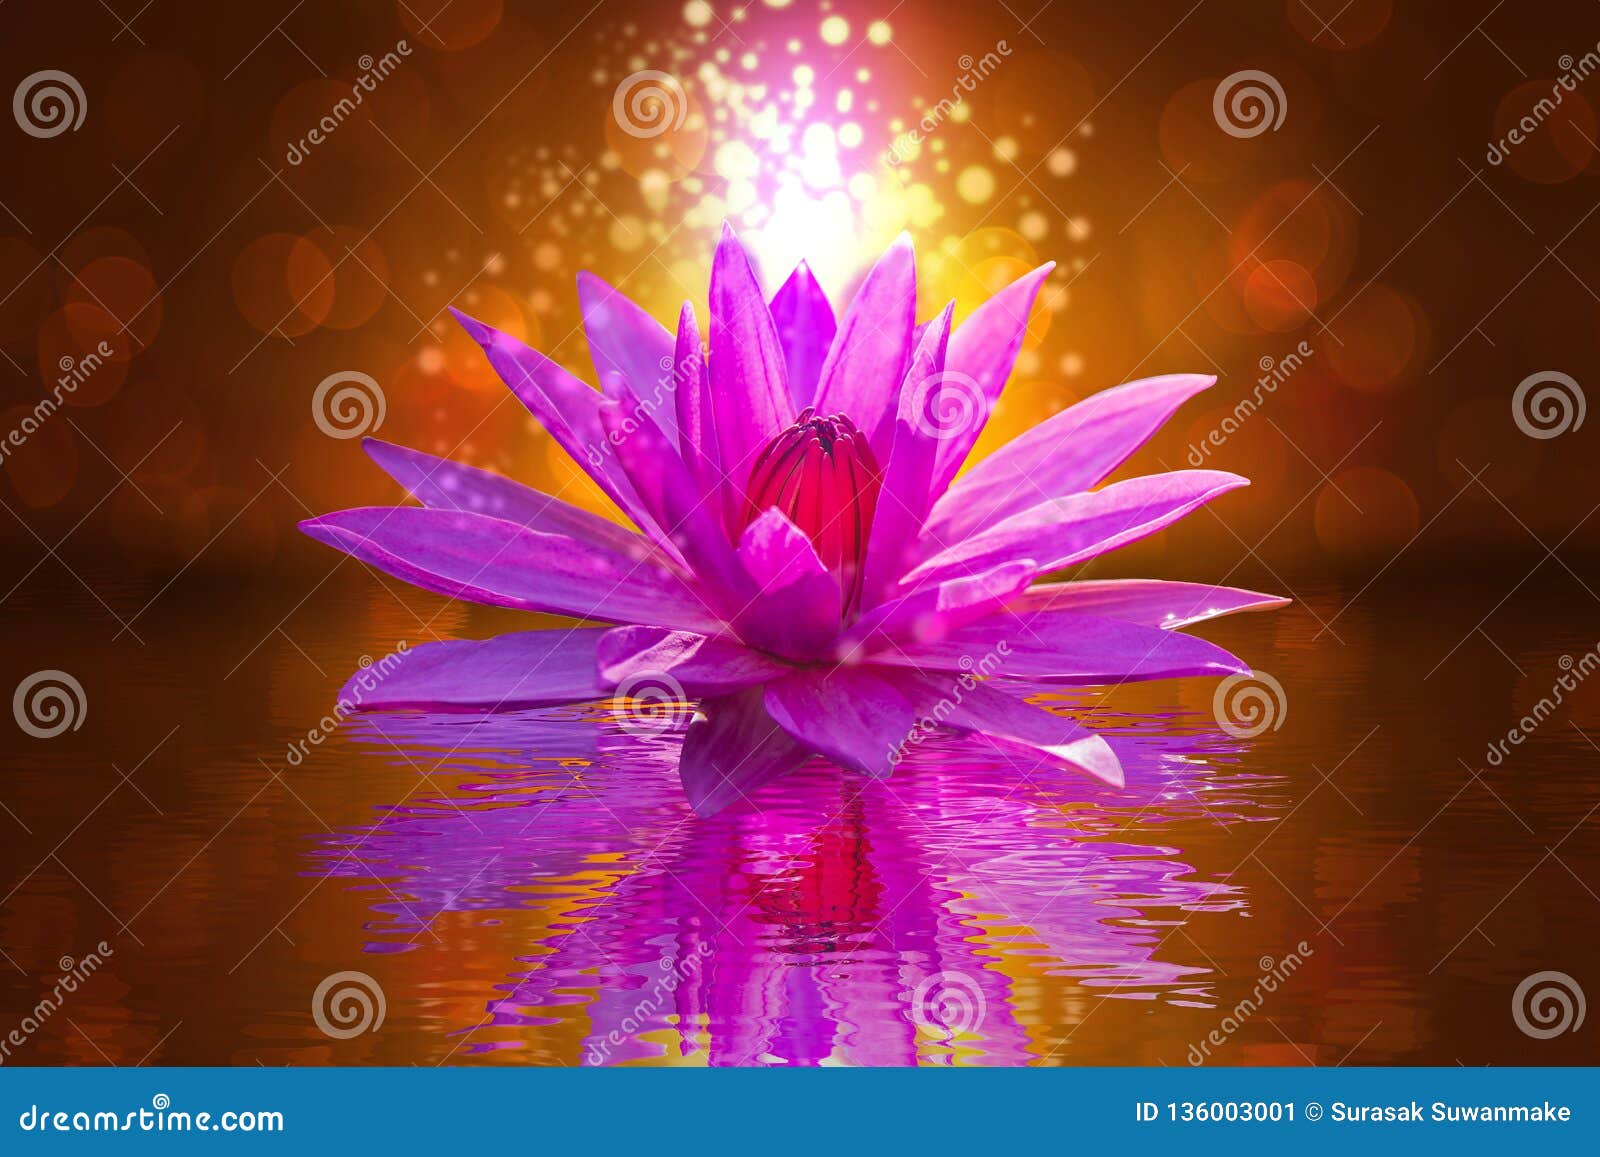 The Lotus Flower Represents The Symbol Of Buddhism And Can